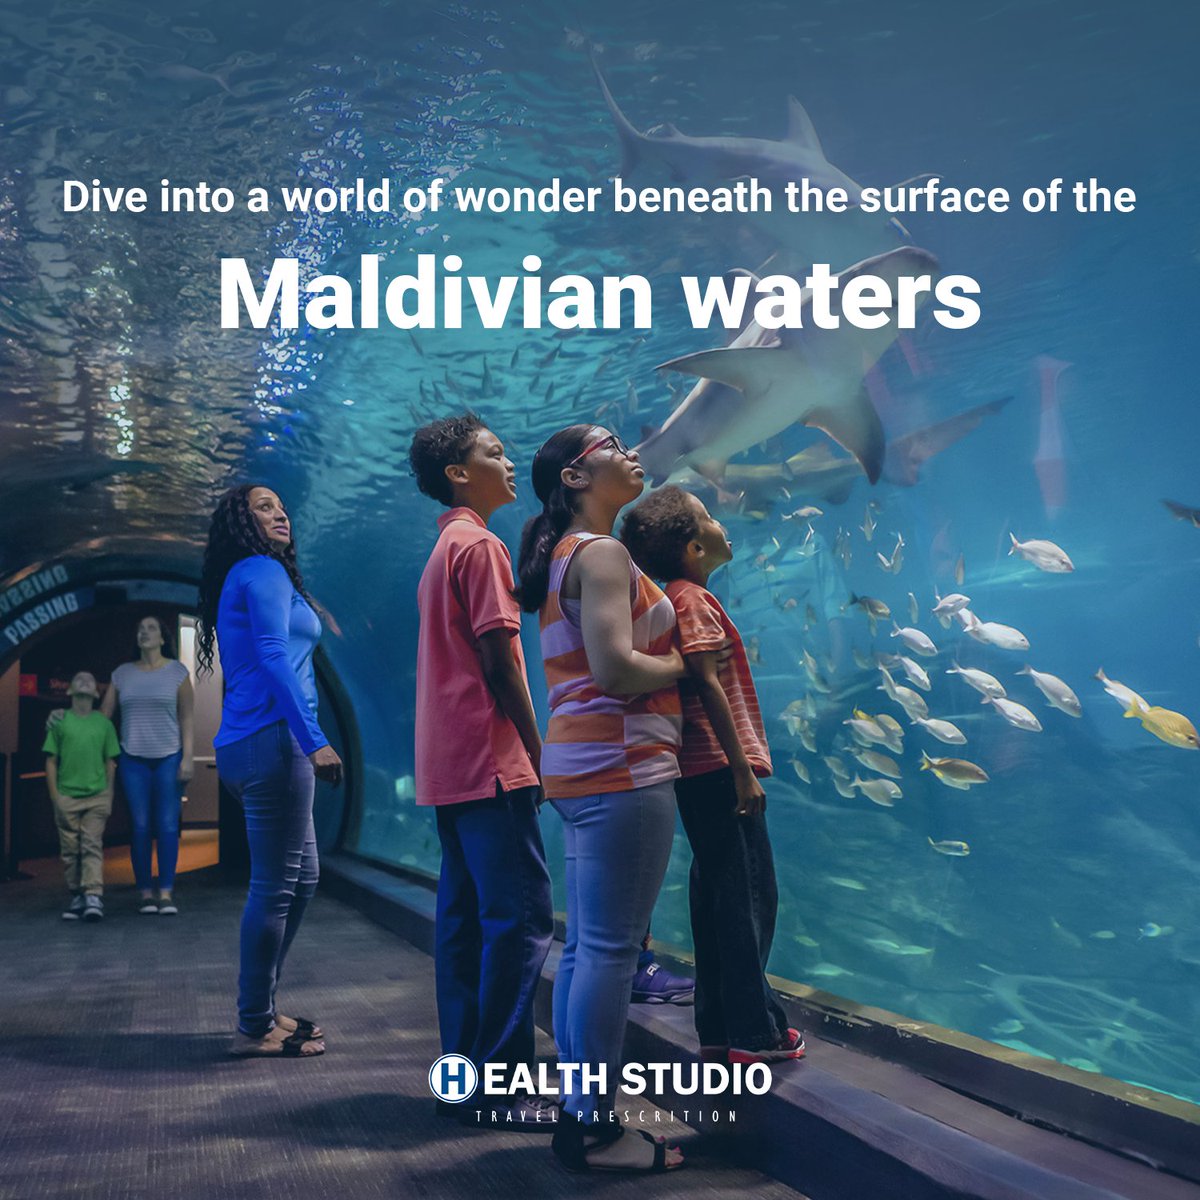 Dive into a world of wonder beneath the surface of the Maldivian waters. Explore colorful coral reefs teeming with marine life, swim alongside majestic manta rays, and encounter vibrant tropical fish in their natural habitat.
get your ticket now:
+9647812900002
+9647712900002